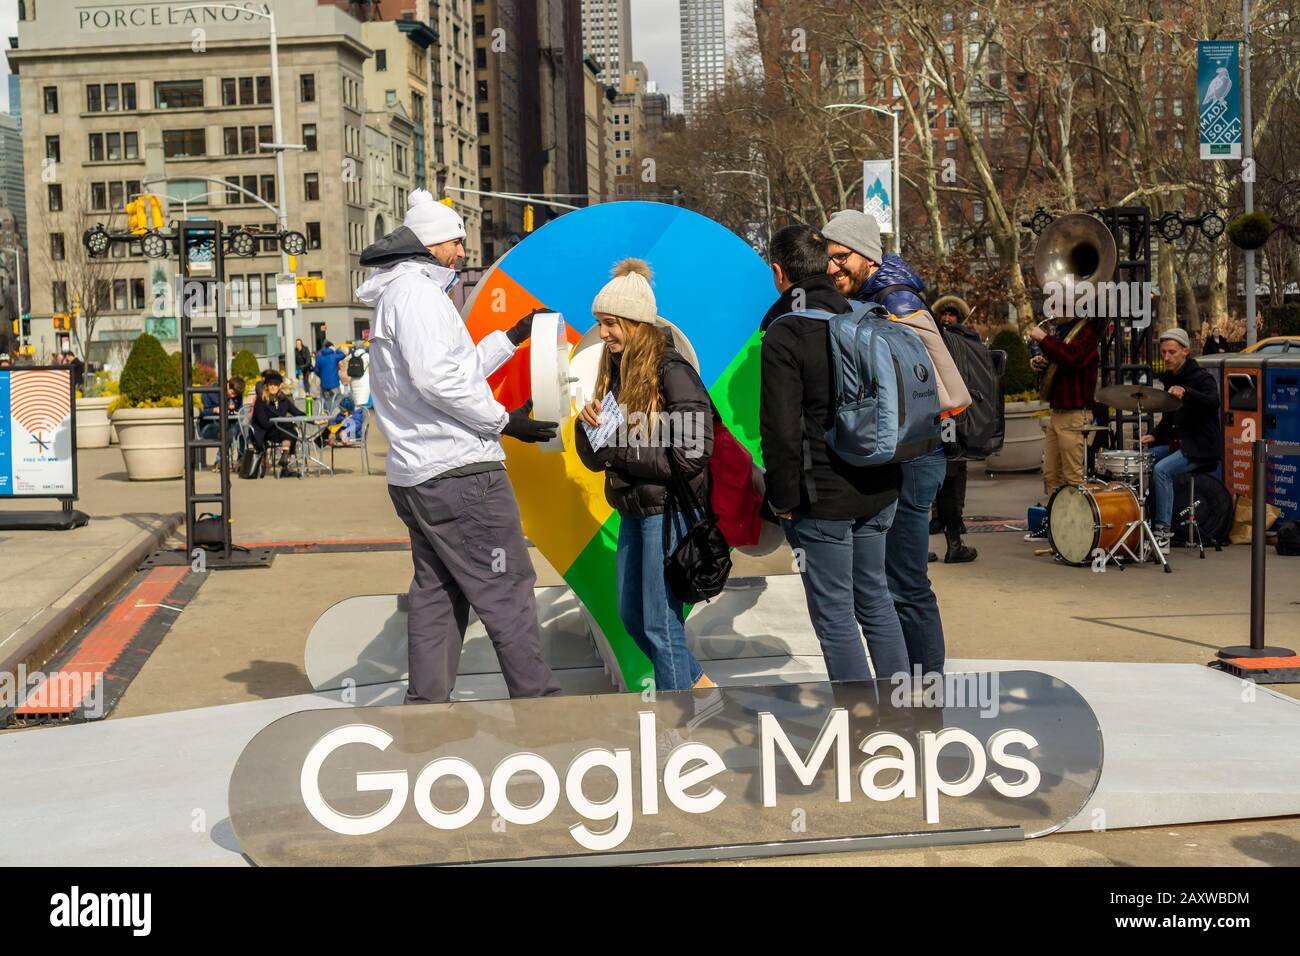 Visitors to Flatiron Plaza in New York vie for prizes as they participate in a Google Maps brand activation on Saturday, February 8, 2020. Google celebrated 15 years of their Maps app with a new design with various new features and a new icon. (© Richard B. Levine) Stock Photo